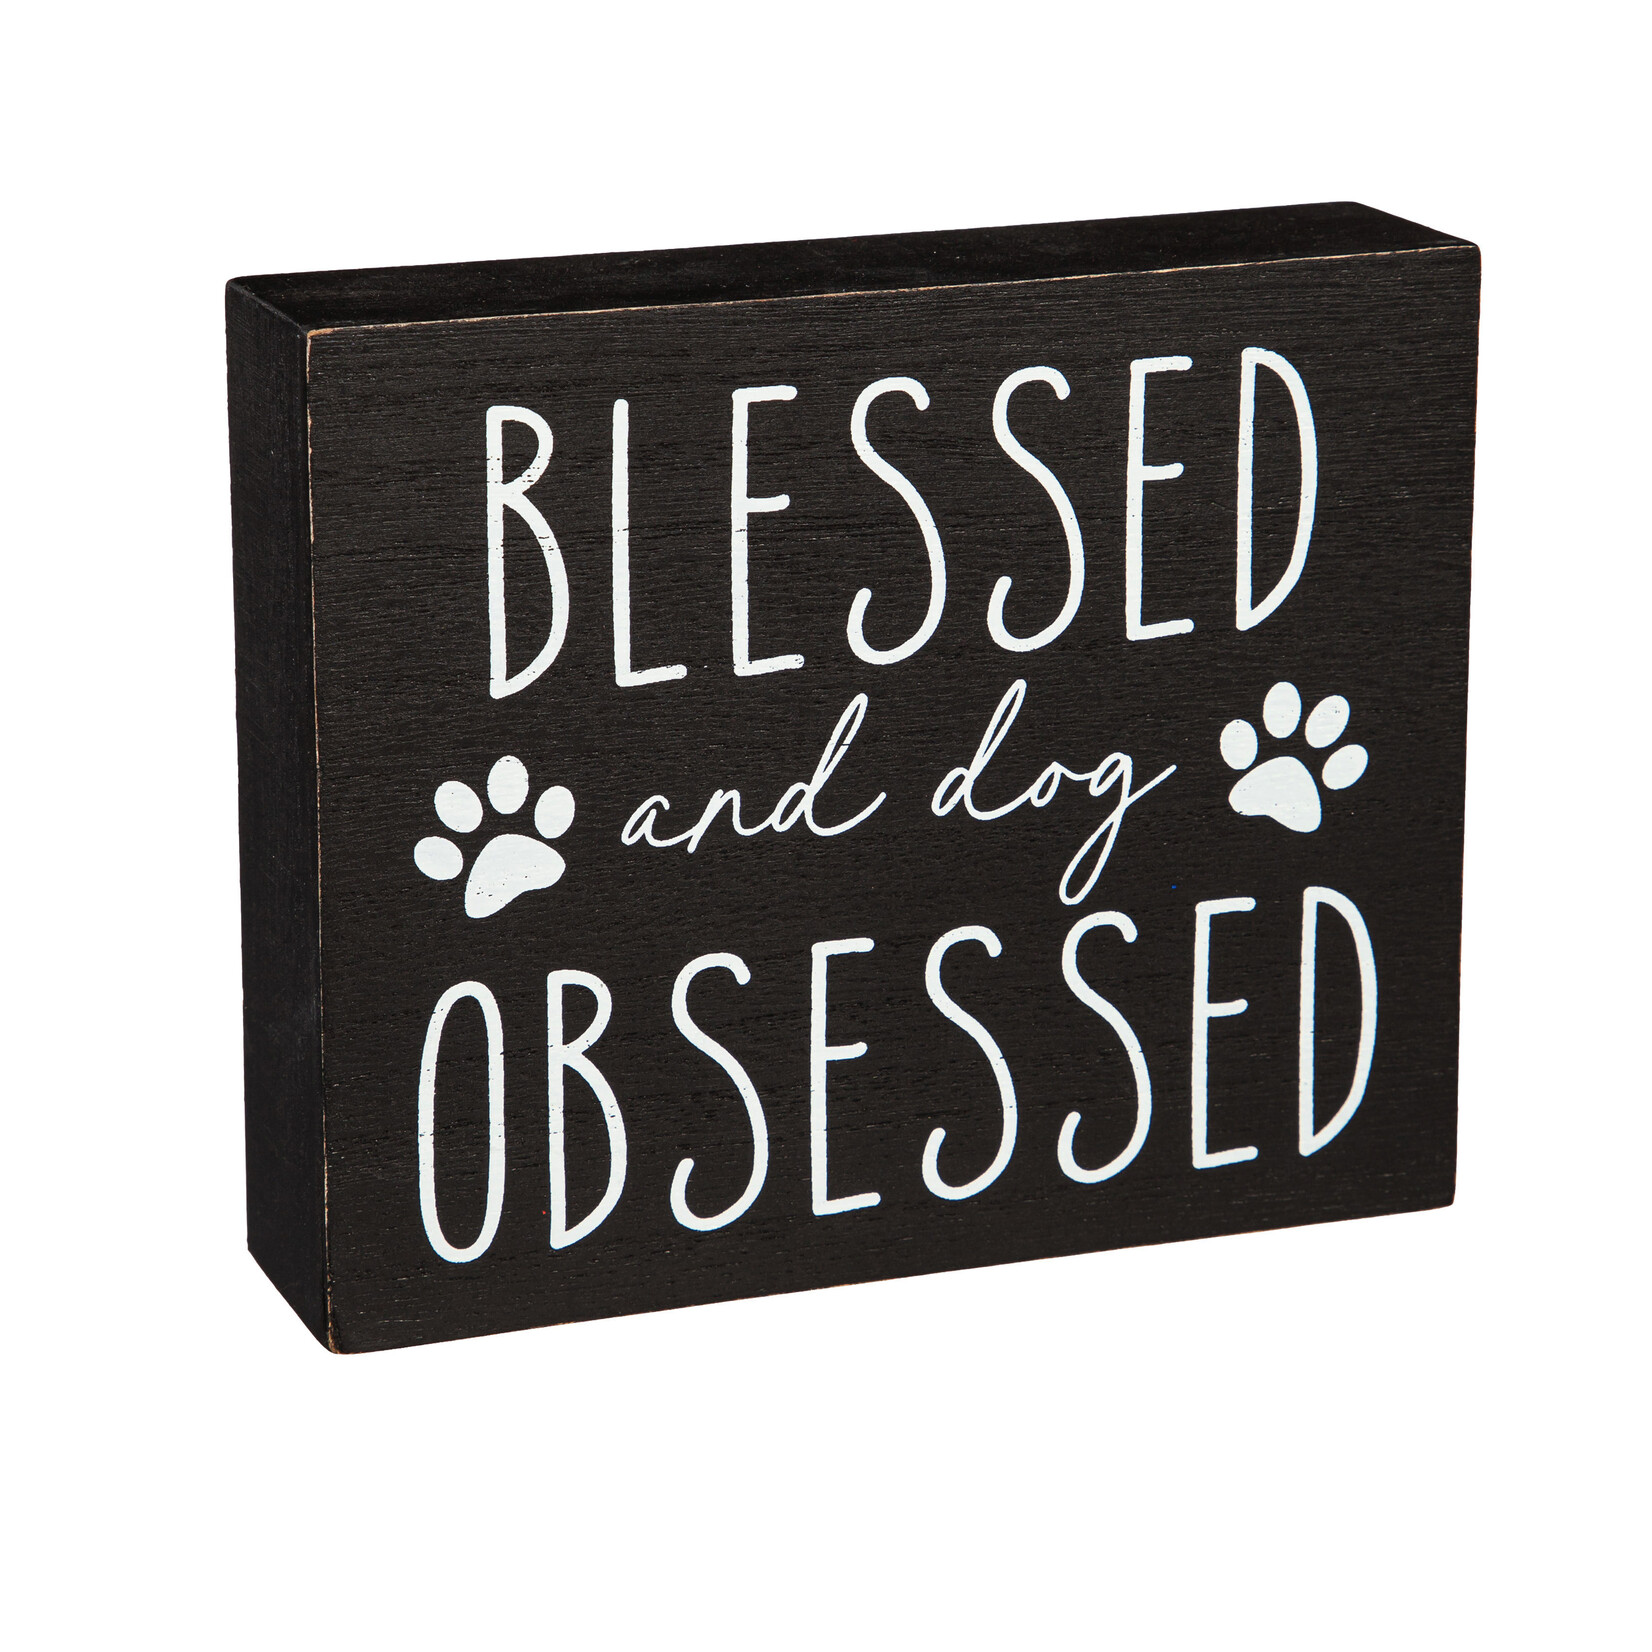 Evergreen Dog Obsessed Wood Sign